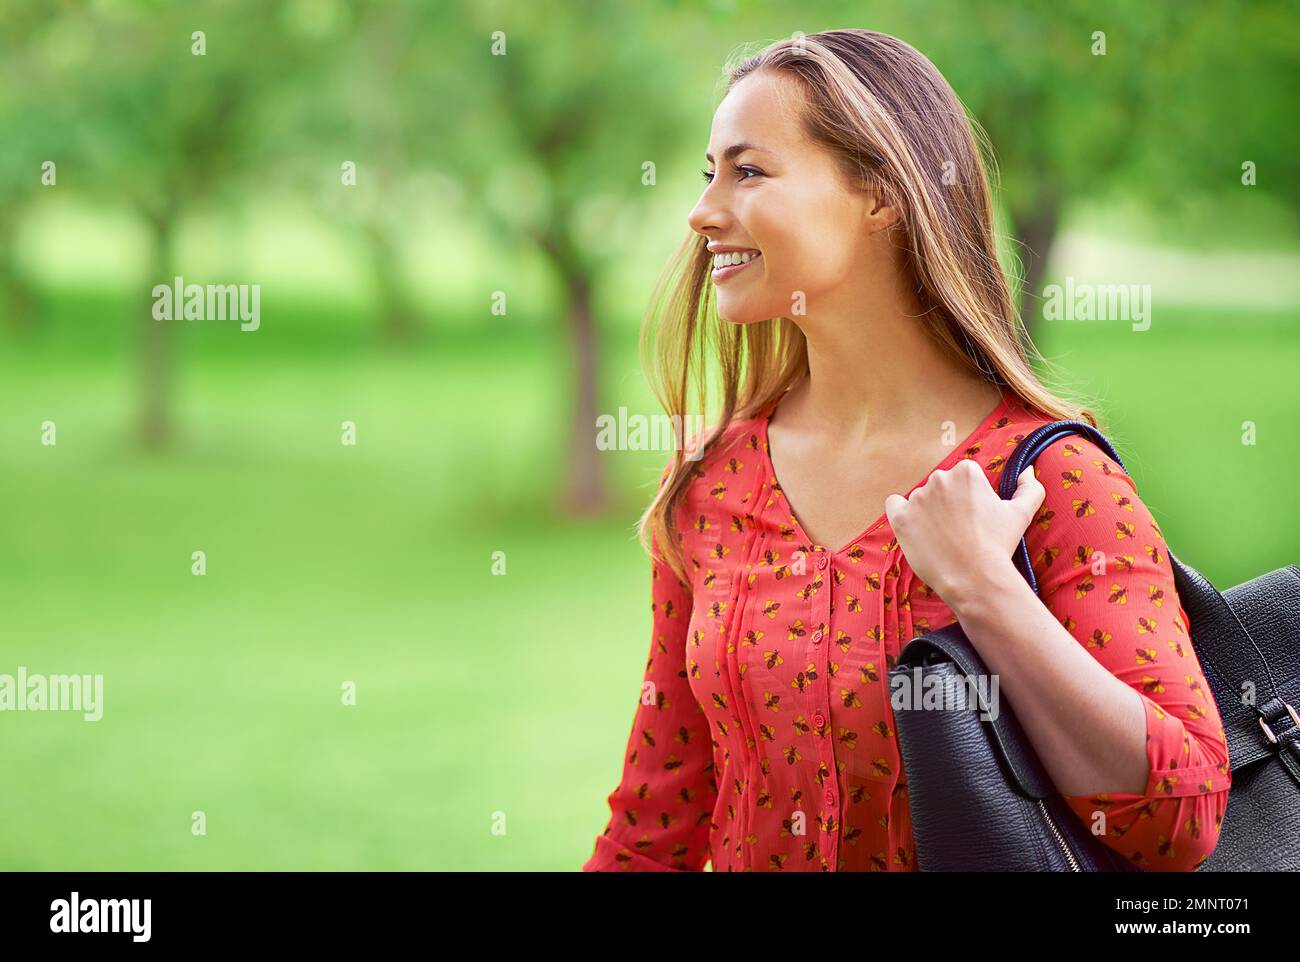 Being outside makes her happy. a young woman taking a walk in the park. Stock Photo